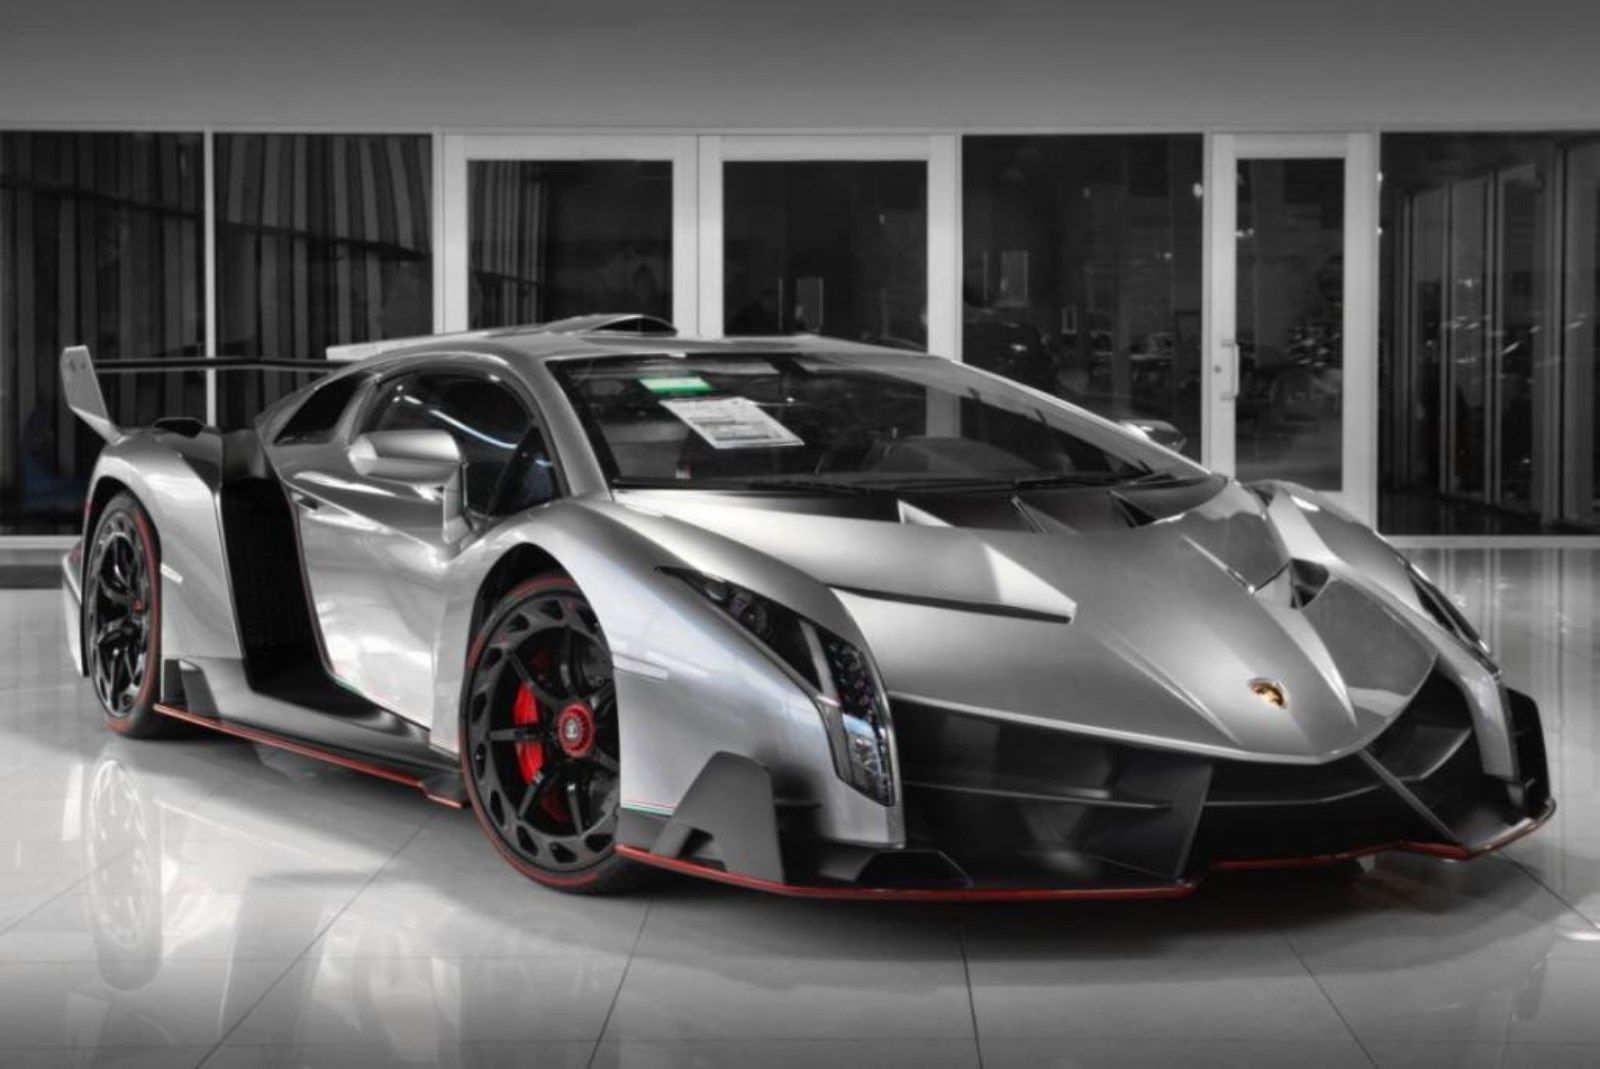 Looking to buy a Lamborghini Veneno? This went on sale for $ 9.4 million